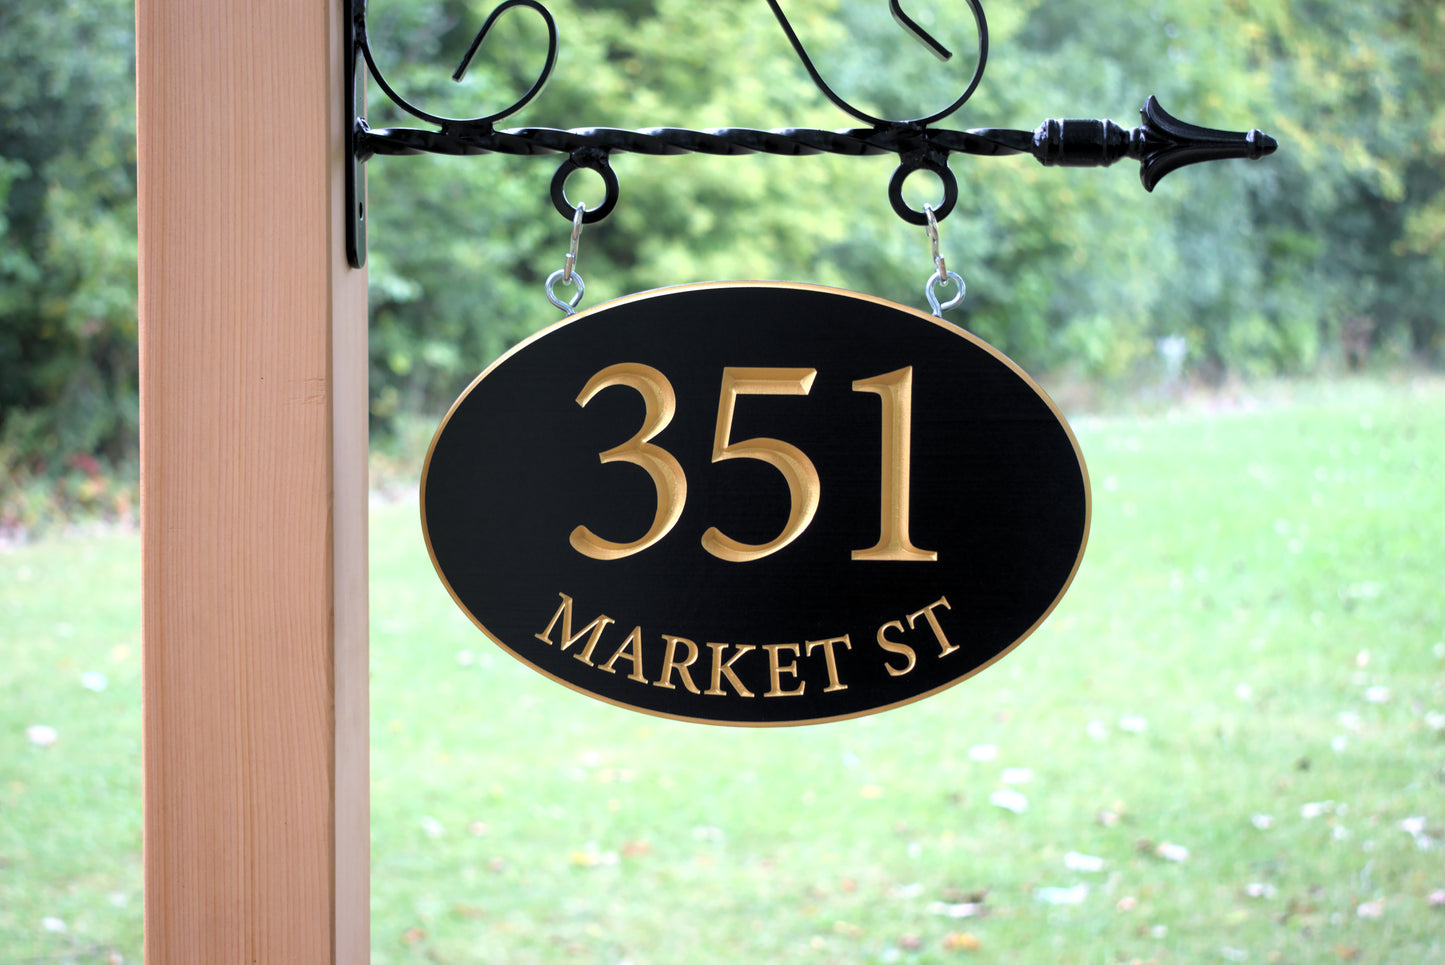 Oval Address Plaque With Street